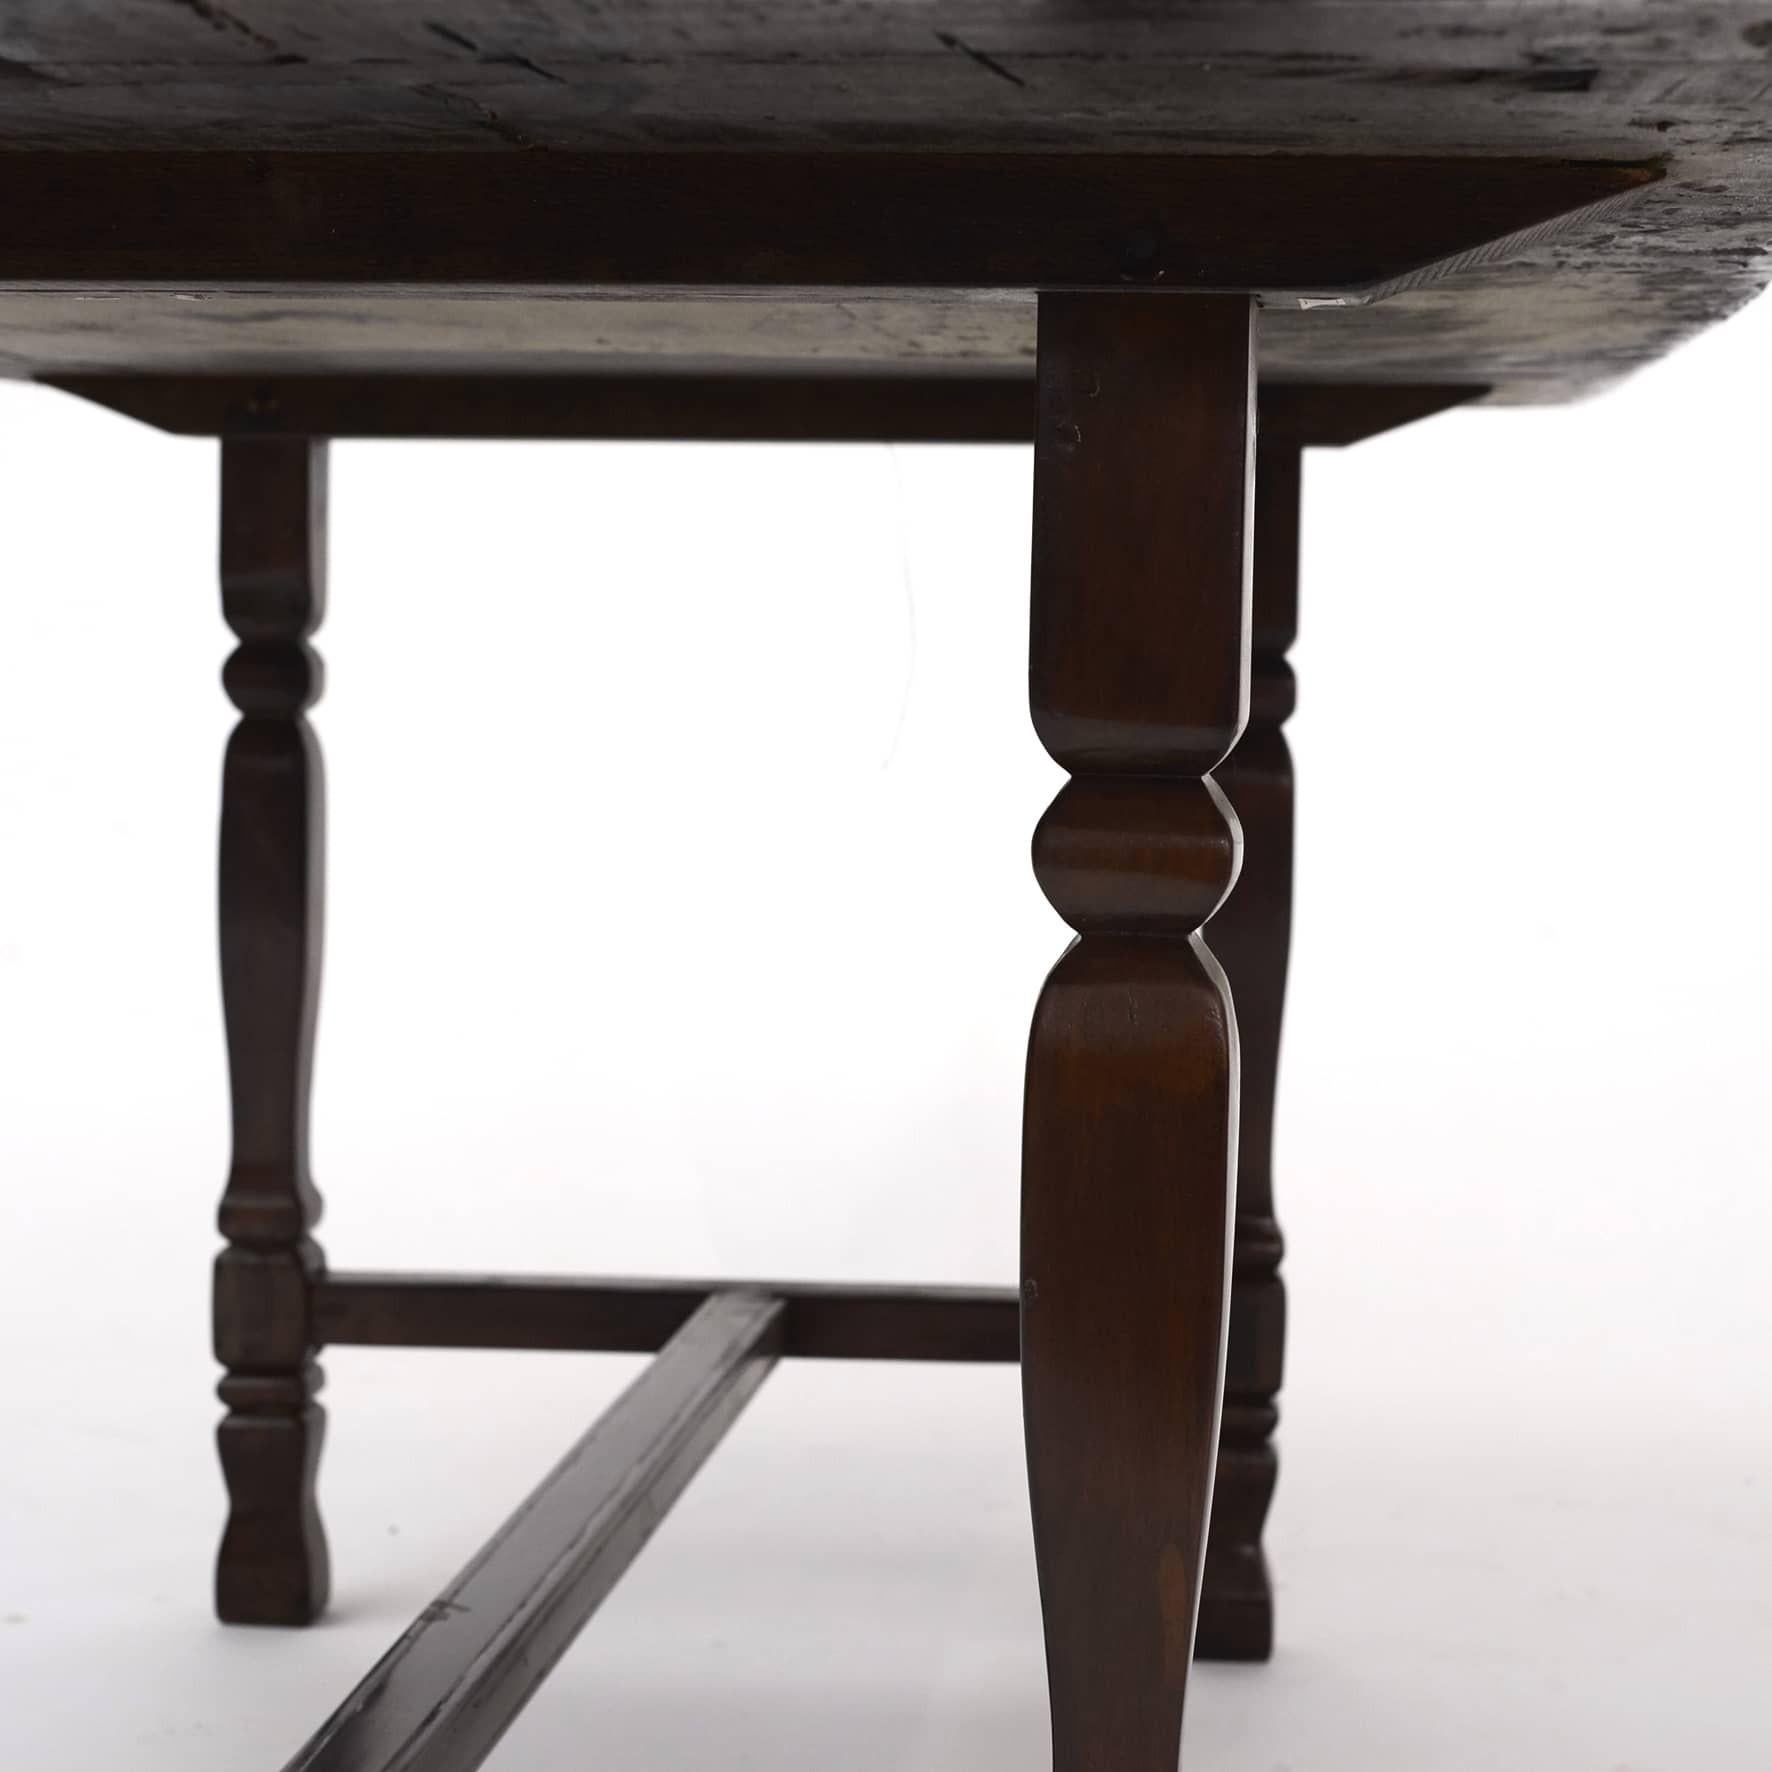 Philippine Dinning Table, Spanish Colony 1860 - 1880 For Sale